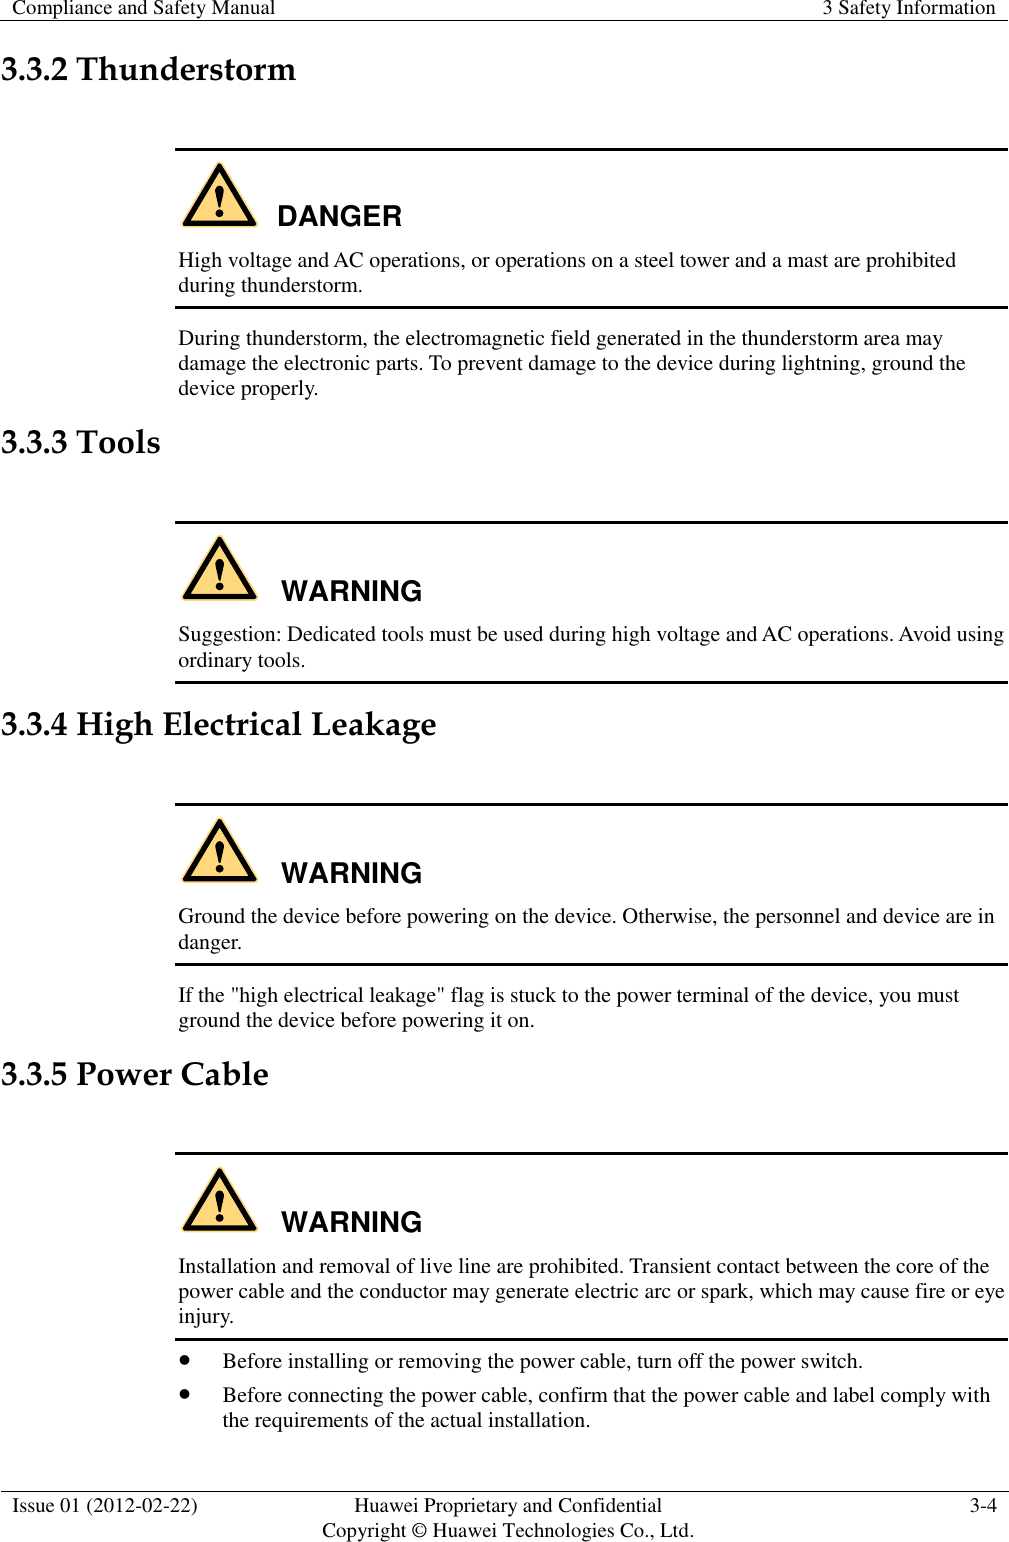 Compliance and Safety Manual 3 Safety Information  Issue 01 (2012-02-22) Huawei Proprietary and Confidential           Copyright © Huawei Technologies Co., Ltd. 3-4  3.3.2 Thunderstorm  DANGER High voltage and AC operations, or operations on a steel tower and a mast are prohibited during thunderstorm. During thunderstorm, the electromagnetic field generated in the thunderstorm area may damage the electronic parts. To prevent damage to the device during lightning, ground the device properly. 3.3.3 Tools  WARNING Suggestion: Dedicated tools must be used during high voltage and AC operations. Avoid using ordinary tools. 3.3.4 High Electrical Leakage  WARNING Ground the device before powering on the device. Otherwise, the personnel and device are in danger. If the &quot;high electrical leakage&quot; flag is stuck to the power terminal of the device, you must ground the device before powering it on. 3.3.5 Power Cable  WARNING Installation and removal of live line are prohibited. Transient contact between the core of the power cable and the conductor may generate electric arc or spark, which may cause fire or eye injury.  Before installing or removing the power cable, turn off the power switch.  Before connecting the power cable, confirm that the power cable and label comply with the requirements of the actual installation. 